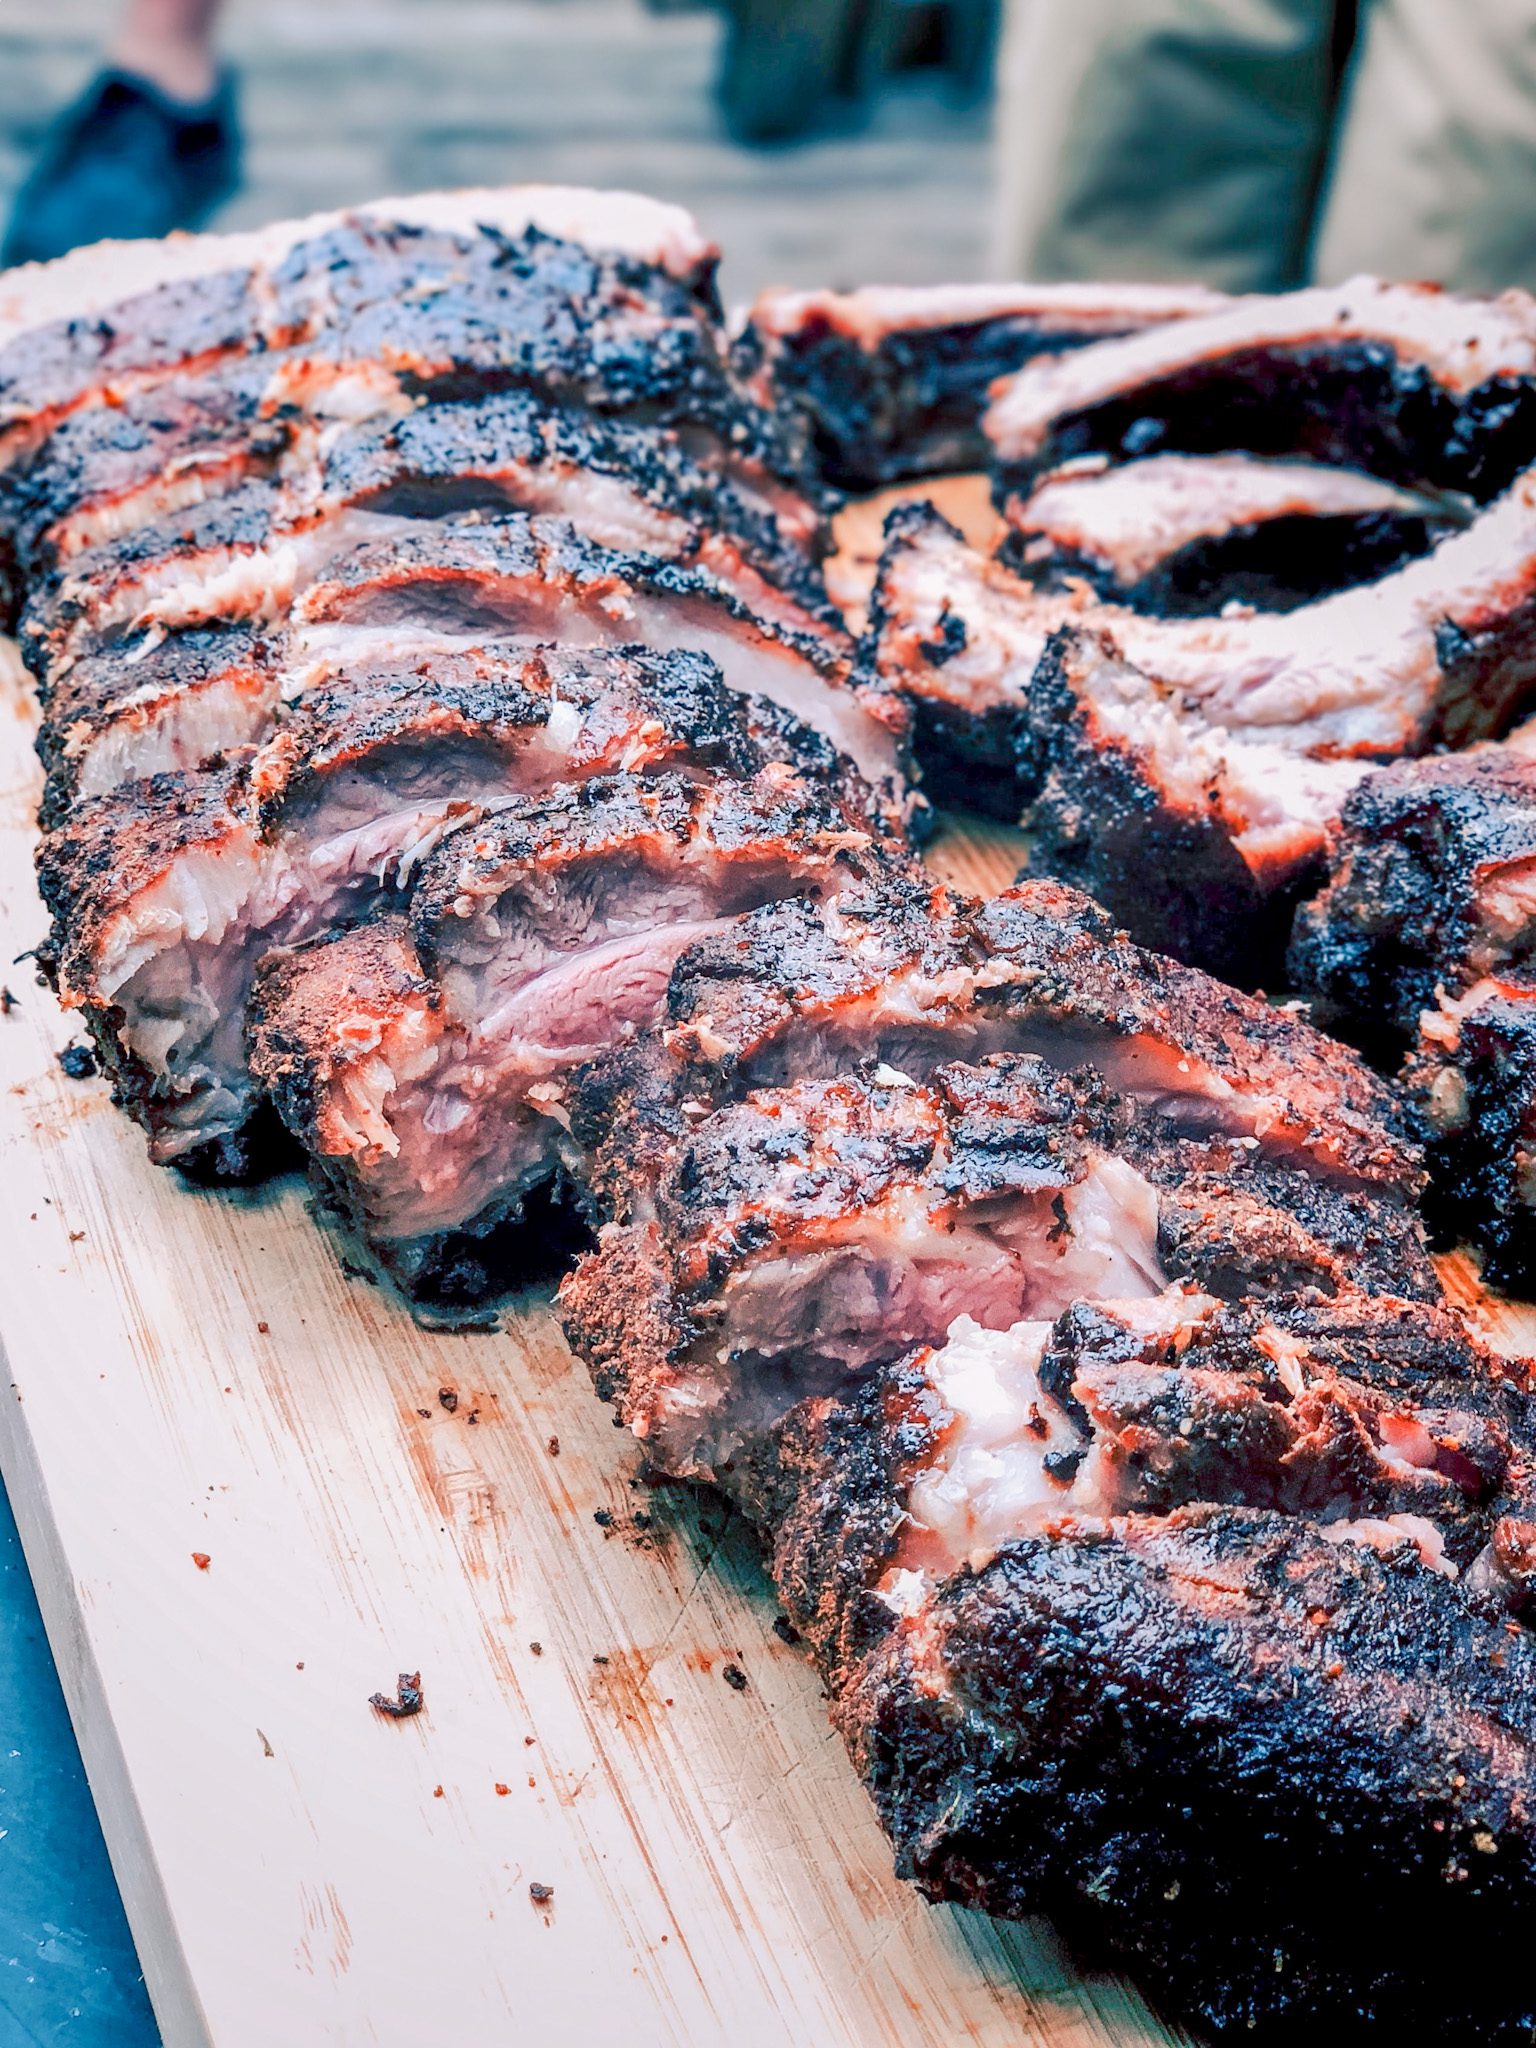 Grilling Season: The Best BBQ's!